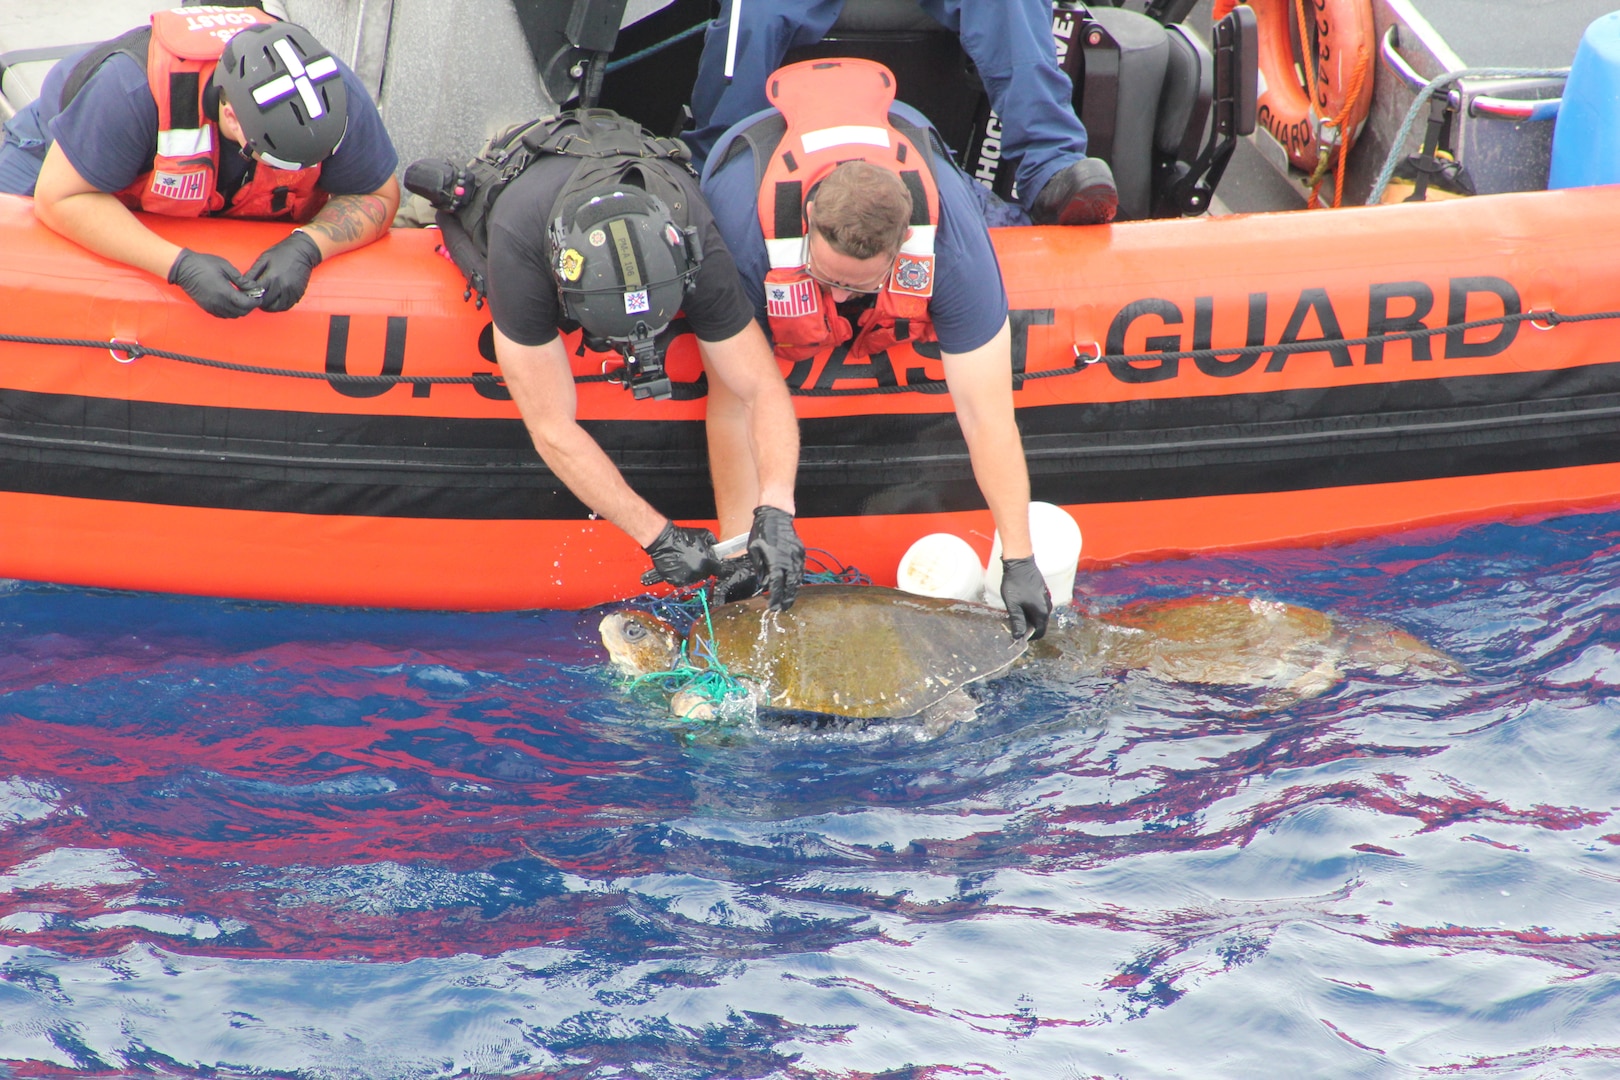 U.S. Coast Guard Cutter Active’s crew successfully rescued three endangered loggerhead sea turtles in the Pacific Ocean, July 10, 2023. The turtles were tangled in abandoned fishing gear, and the crew members removed the derelict gear and properly disposed of it to prevent further harm to wildlife. (U.S. Coast Guard photo)